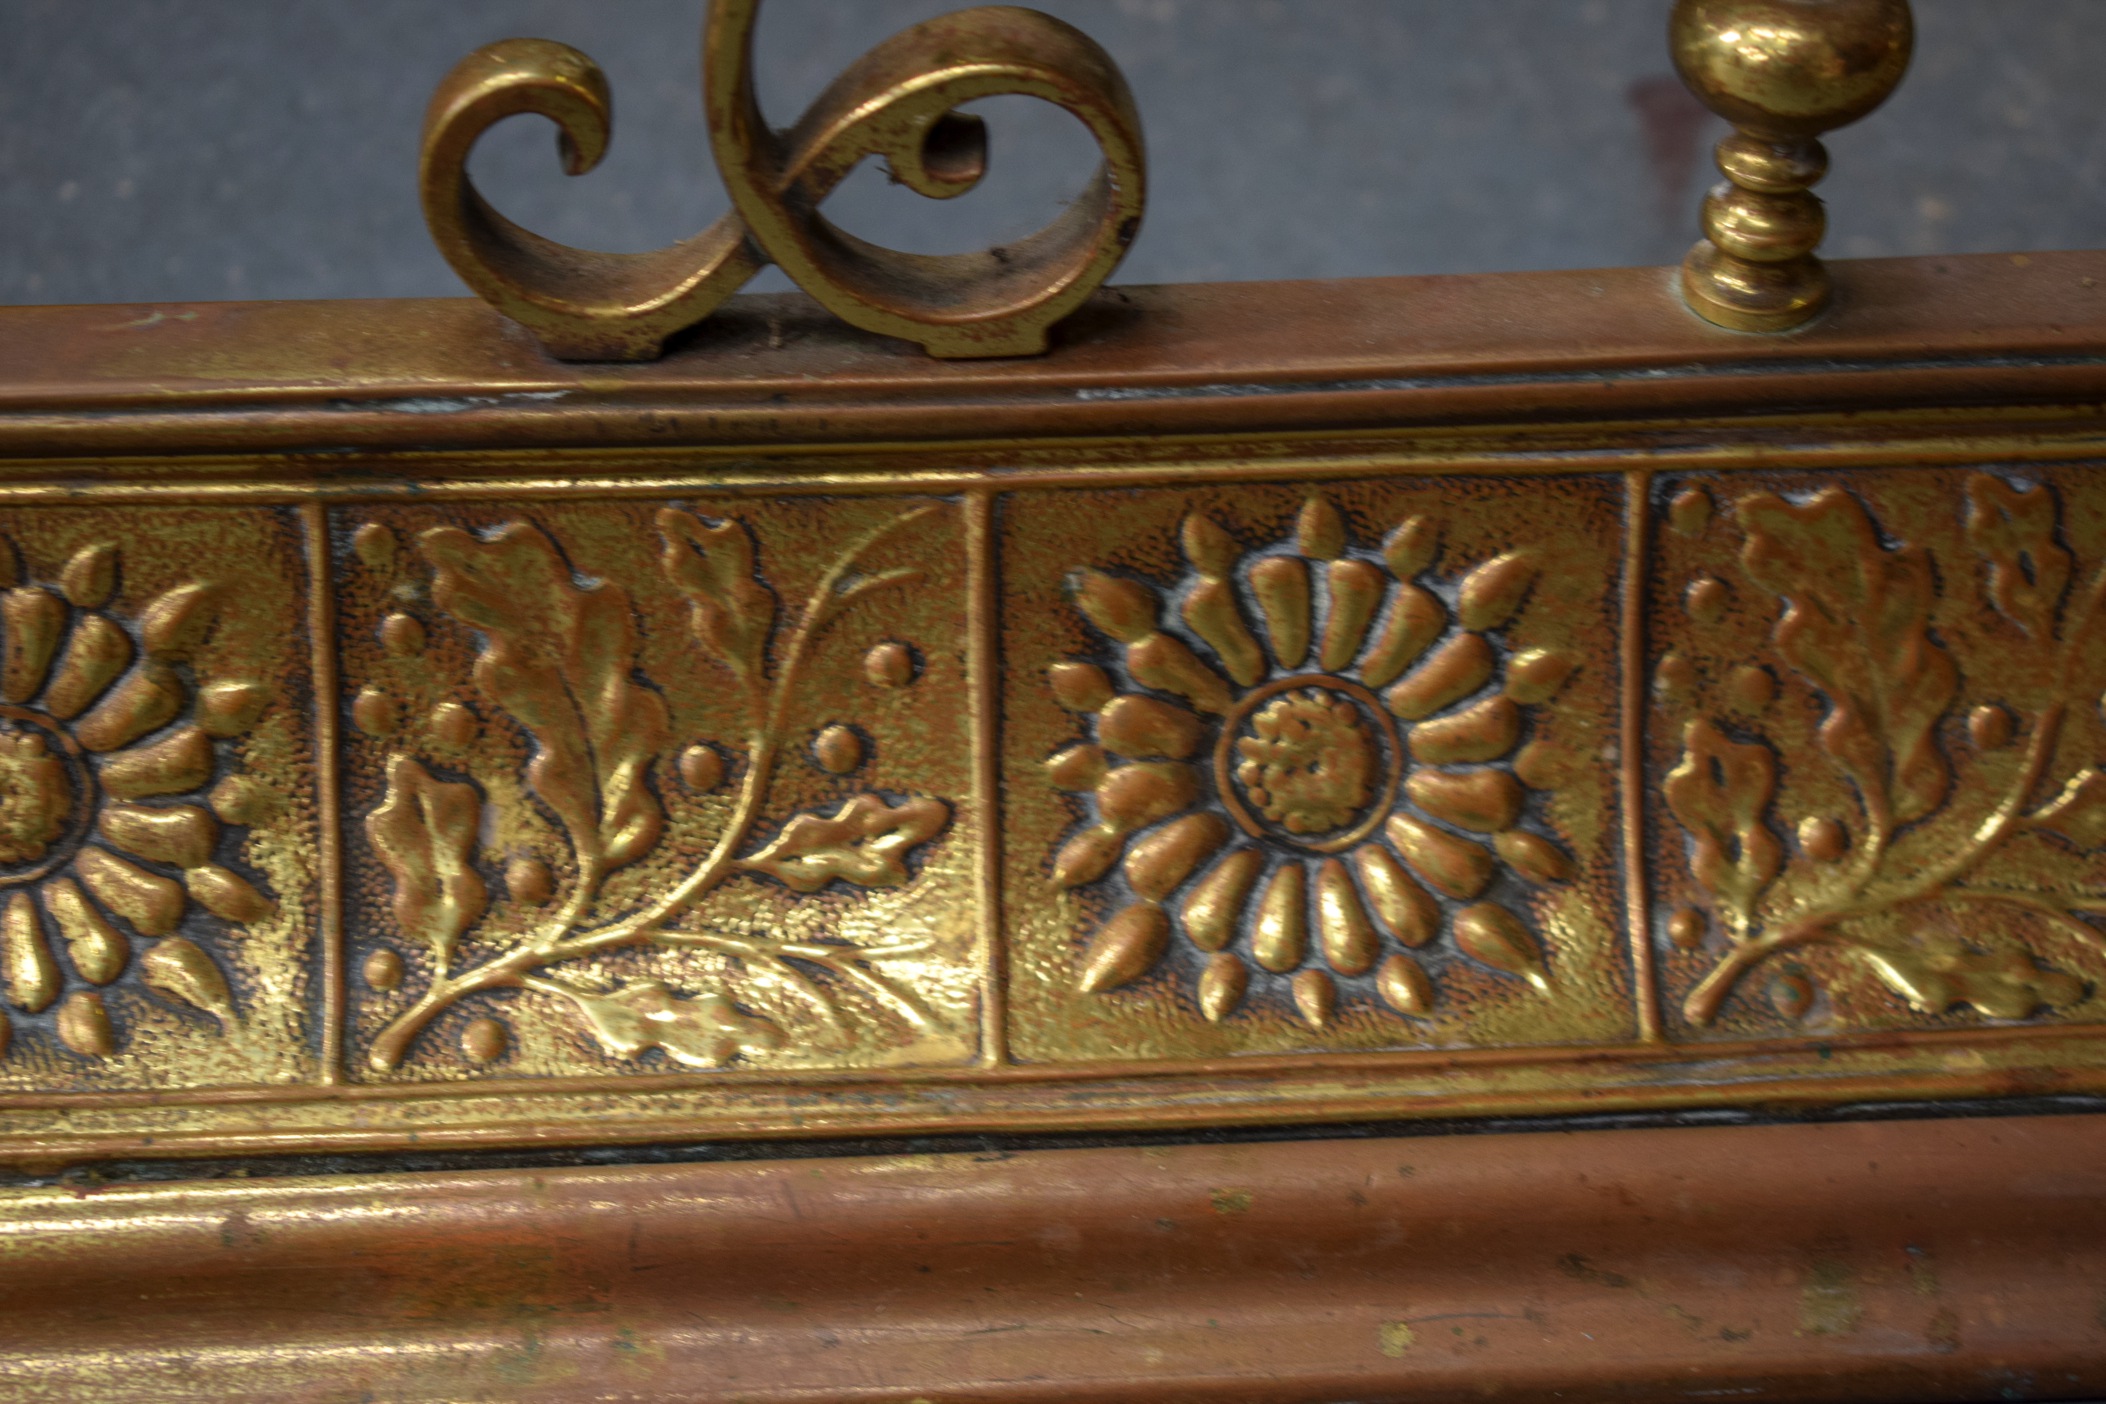 AN EARLY 20TH CENTURY ARTS AND CRAFTS COPPER AND BRASS FENDER, decorated with panels of flowers, - Image 2 of 4